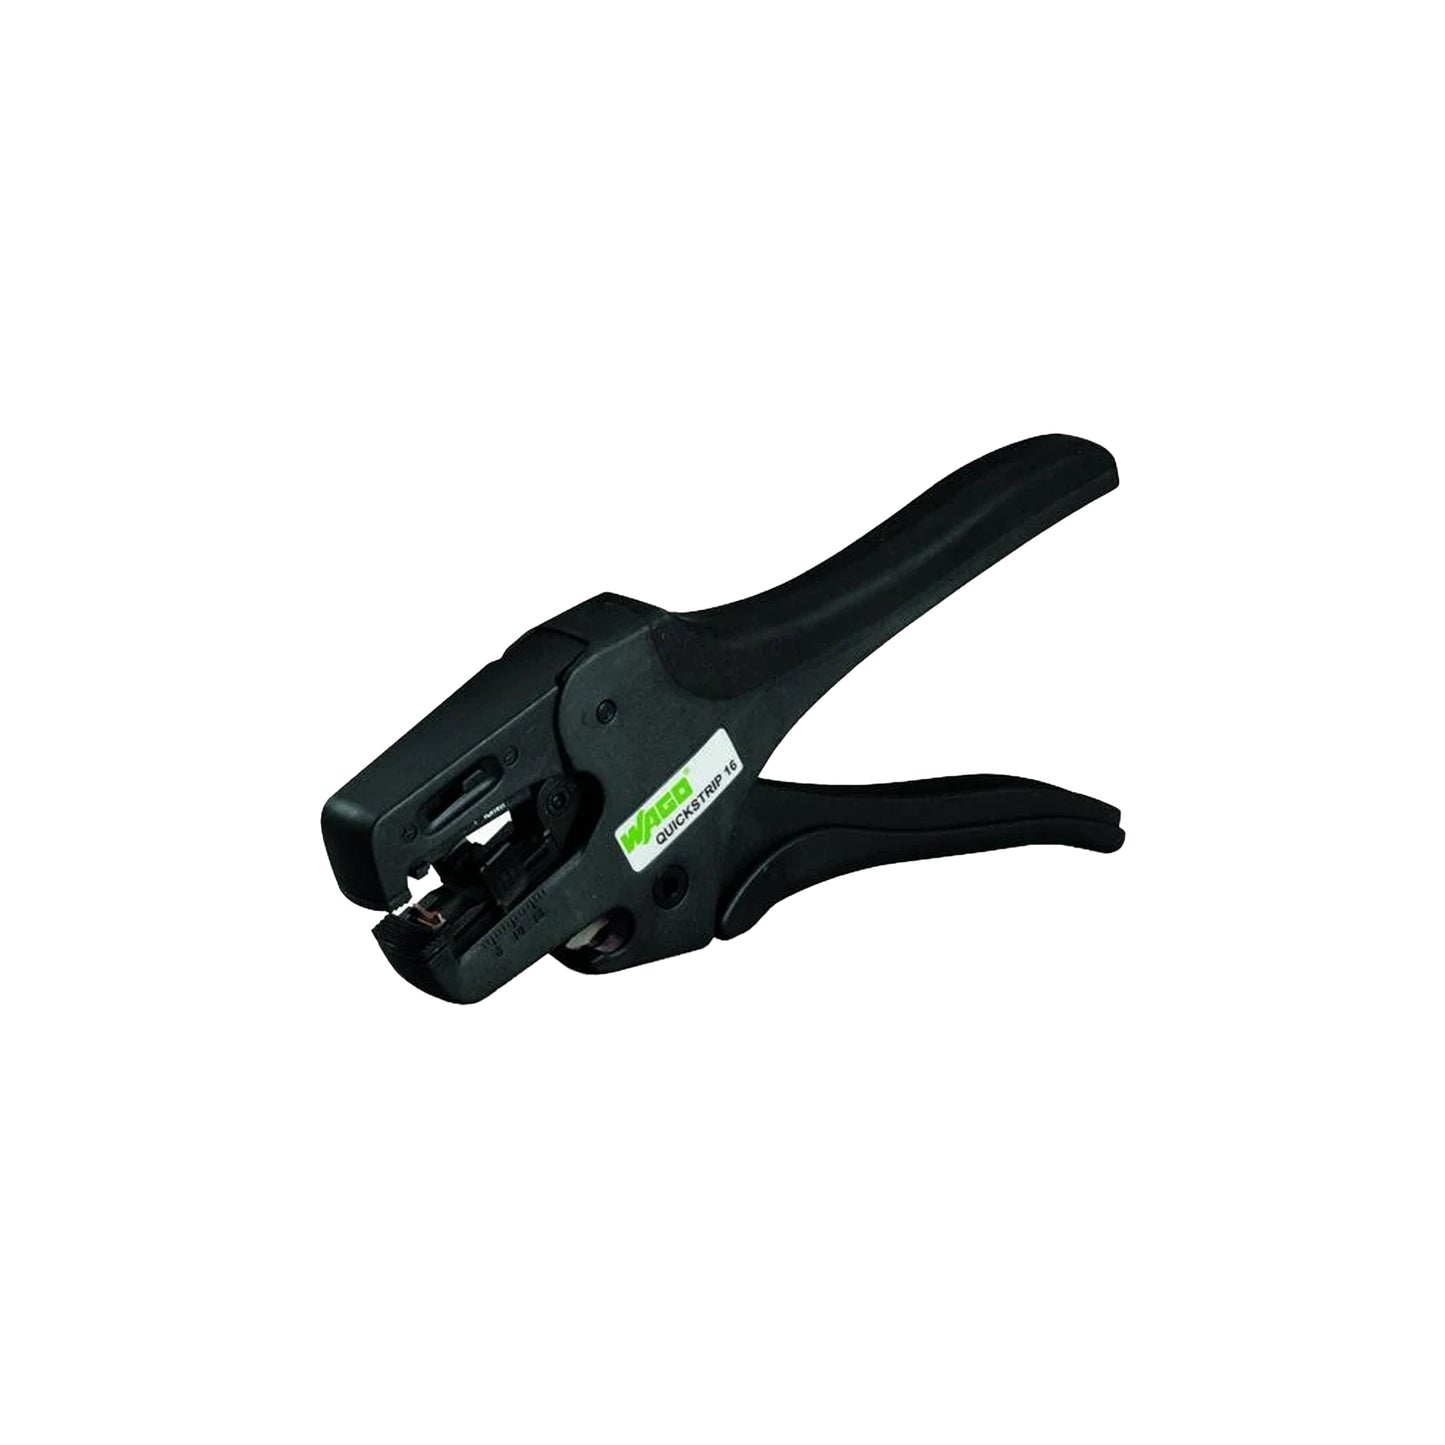 Wago 206-125 | Quickstrip 16 stripping tool, 4 mm - 16 mm, Cutter for conductors up to 10 mm